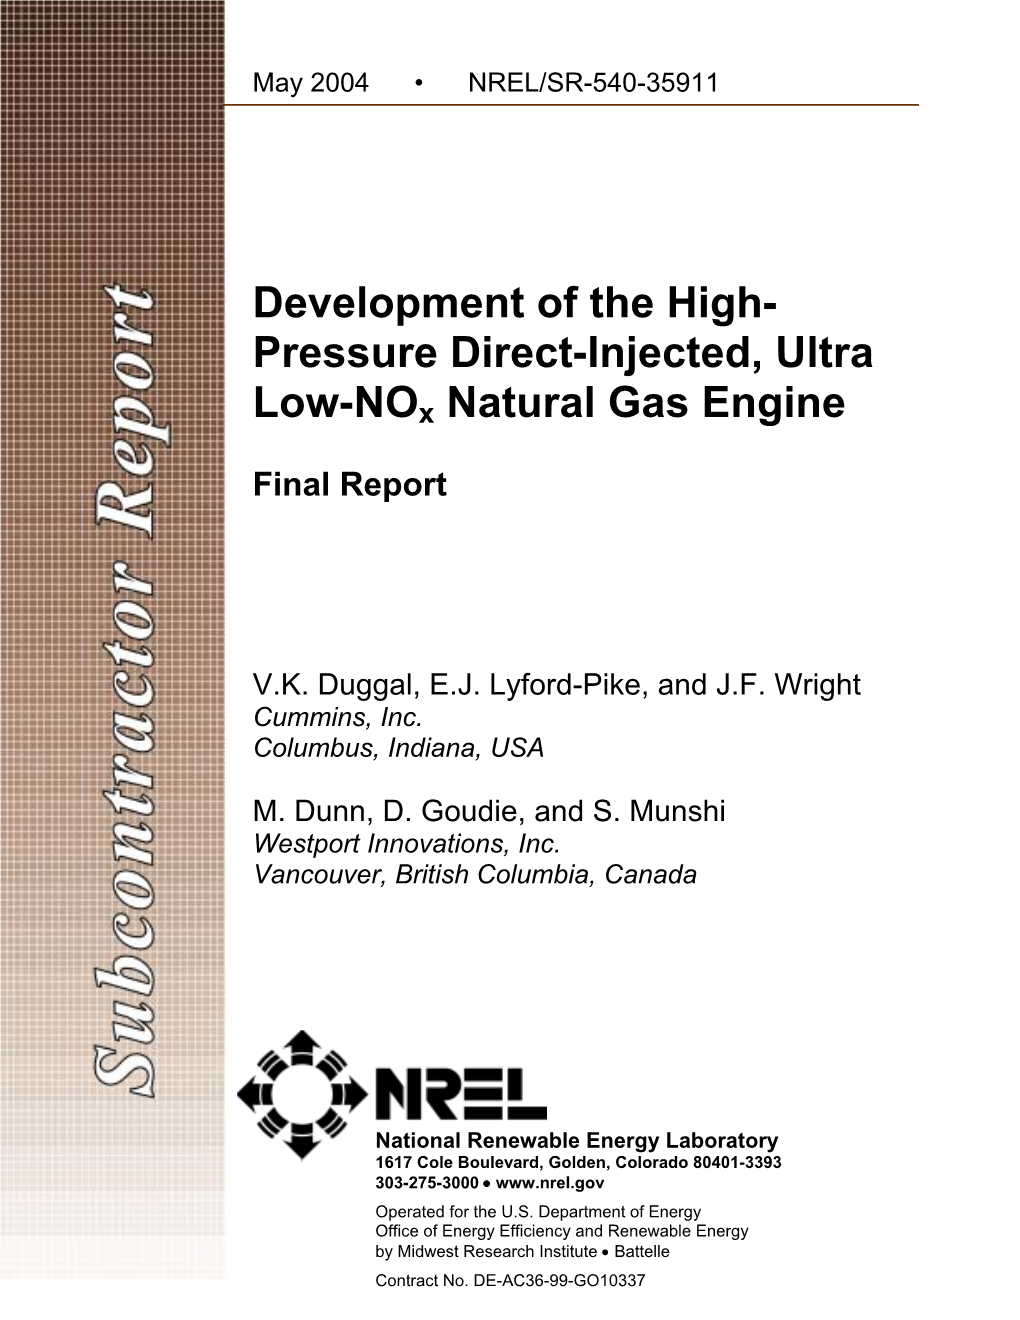 Pressure Direct-Injected, Ultra Low-Nox Natural Gas Engine